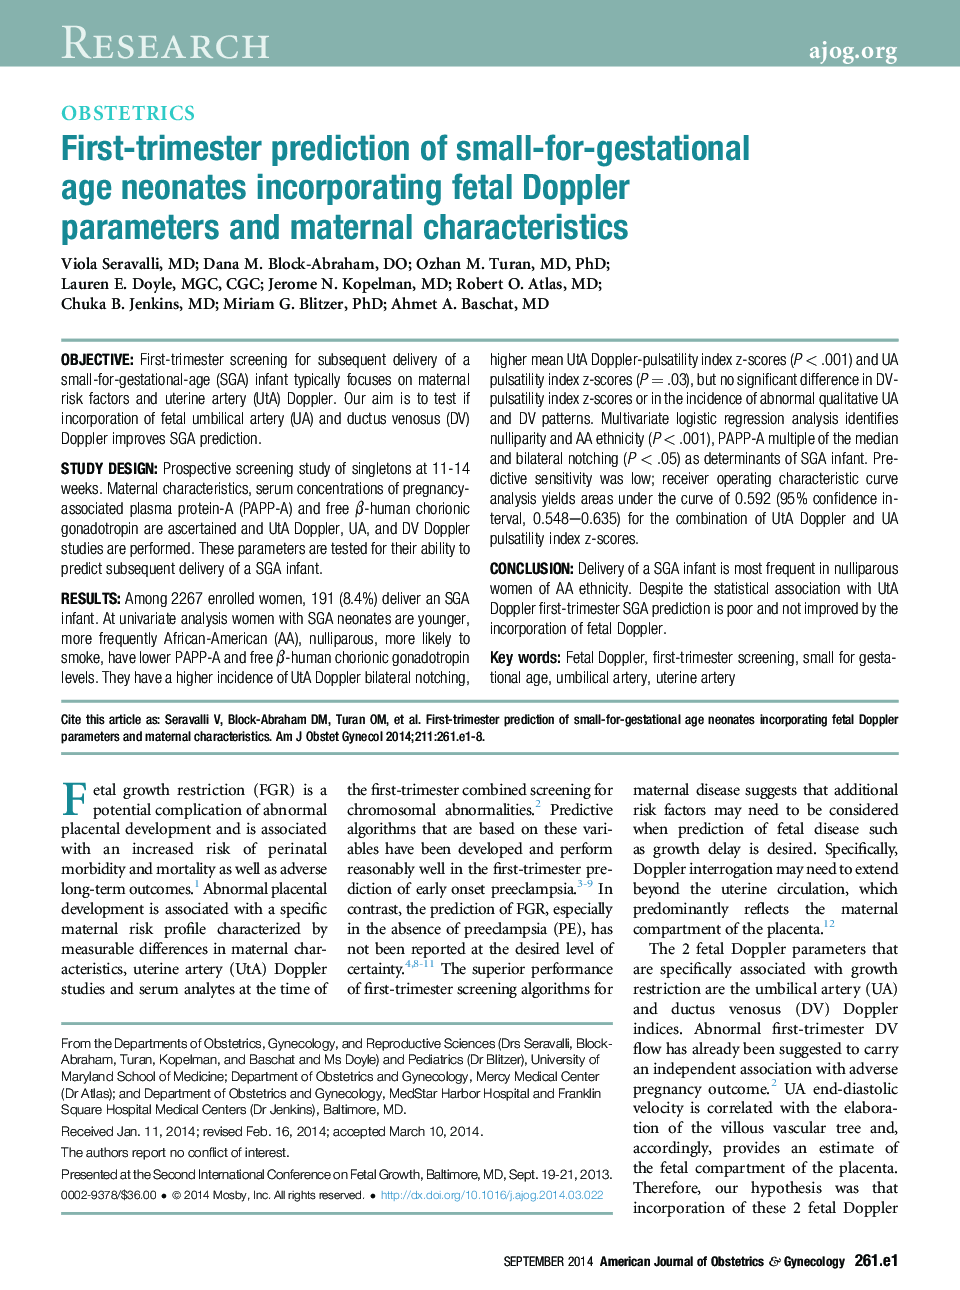 First-trimester prediction of small-for-gestational age neonates incorporating fetal Doppler parameters and maternal characteristics